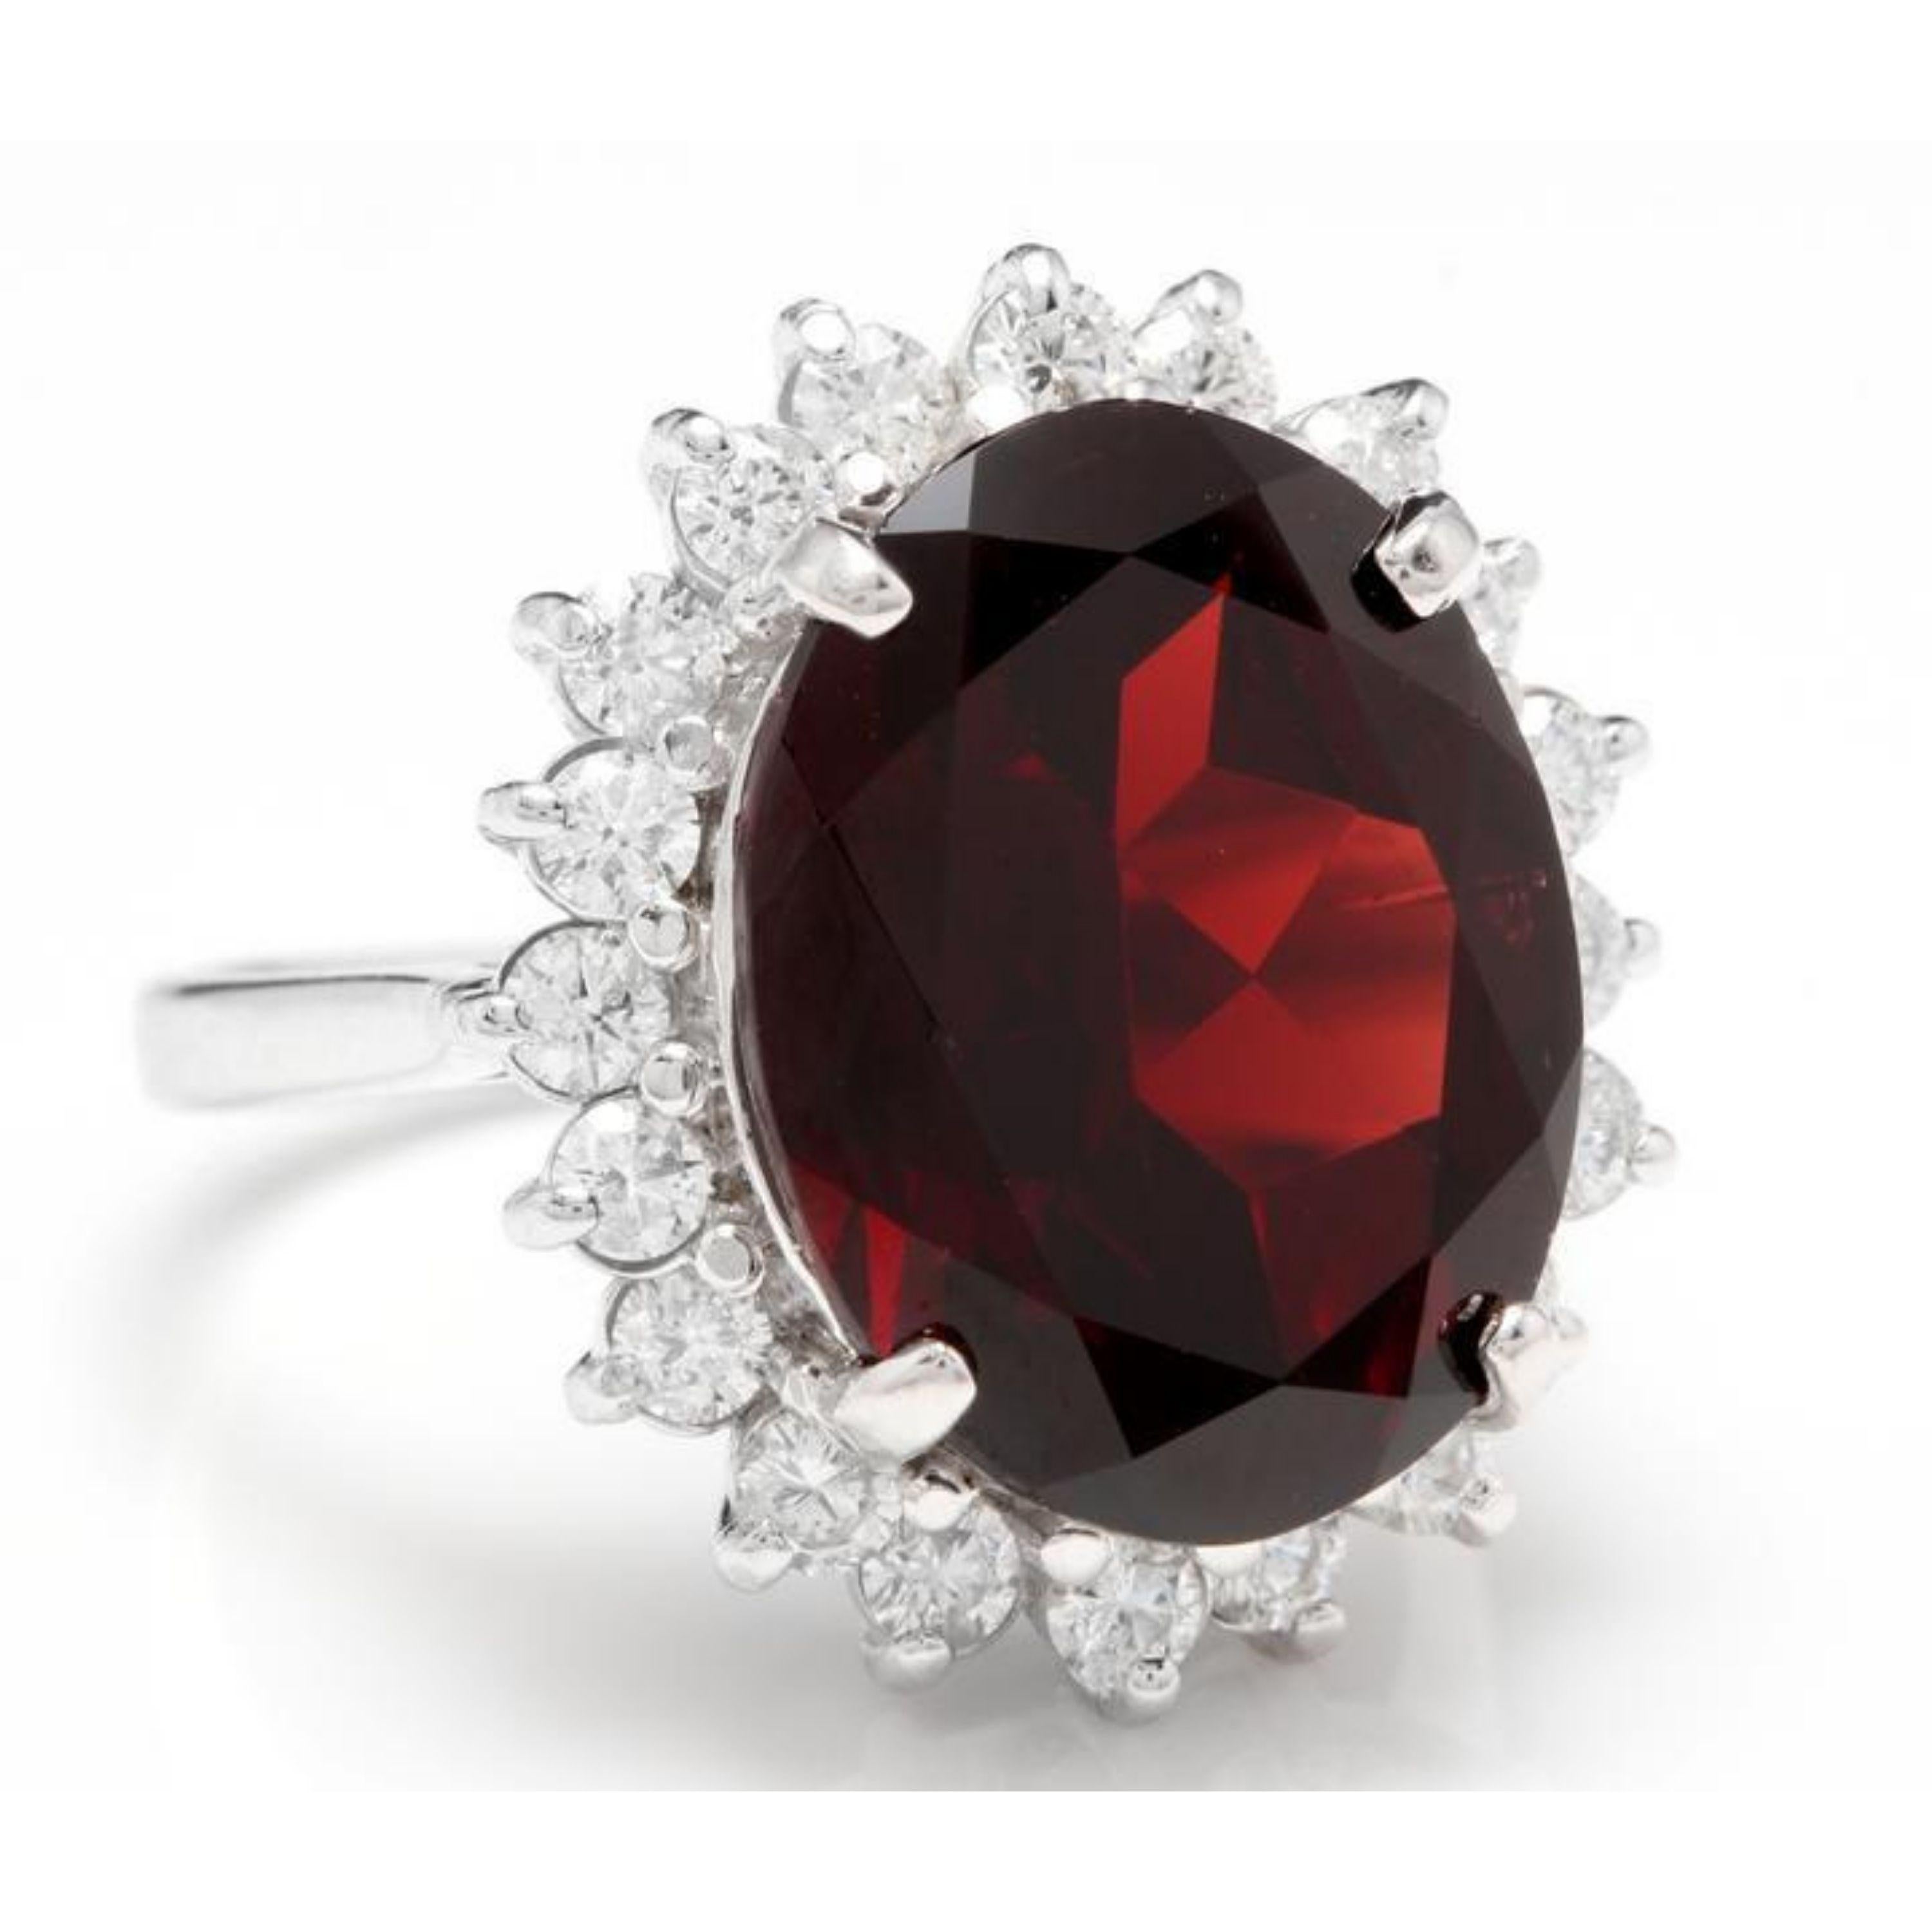 11.05 Carats Impressive Red Garnet and Natural Diamond 14K White Gold Ring

Total Natural Oval Red Garnet Weight is: Approx. 10.00 Carats

Garnet Measures: Approx. 16.00mm x 12.00mm

Natural Round Diamonds Weight: Approx. 1.05 Carats (color G-H /